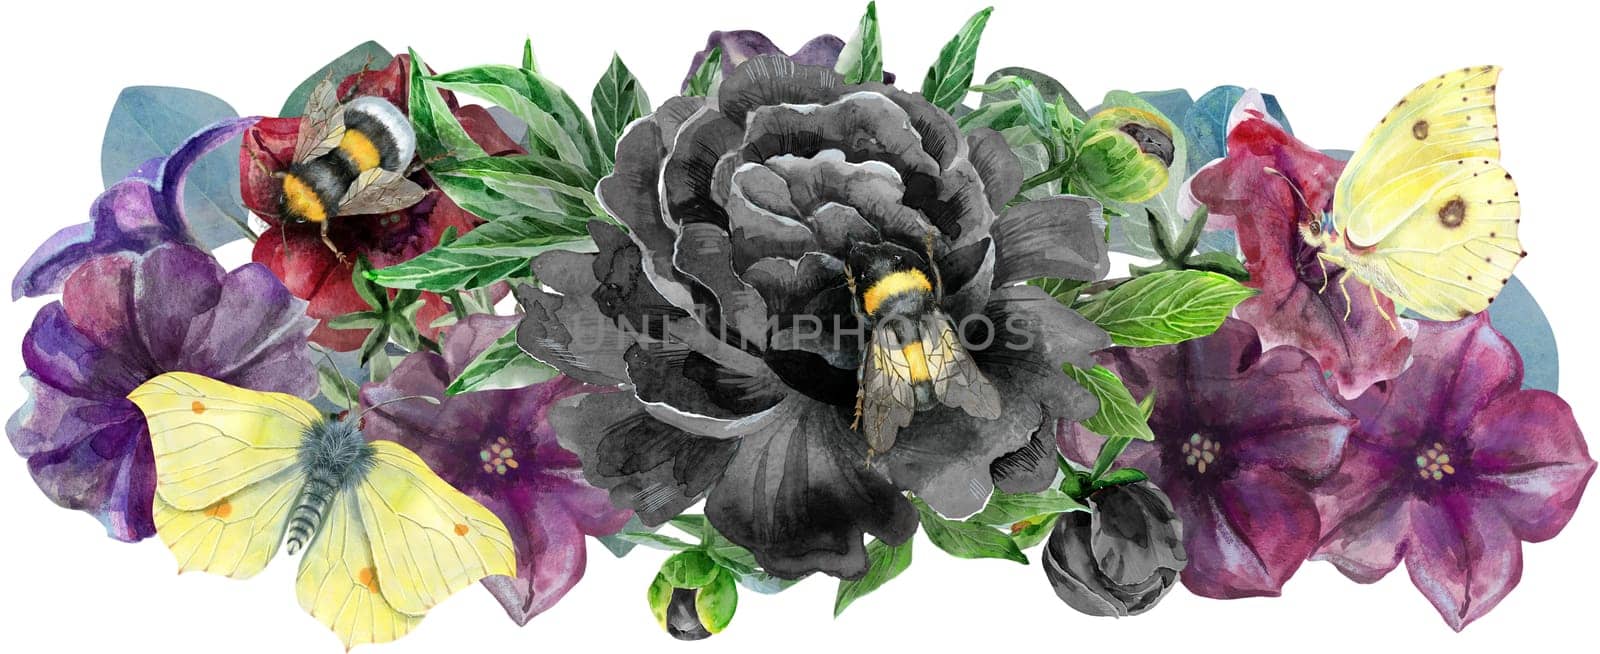 Elegant bouquet with petunia and peony flowers, design element. Floral composition can be used for wedding, baby shower, mothers day, valentines day cards, invitations. in watercolor style